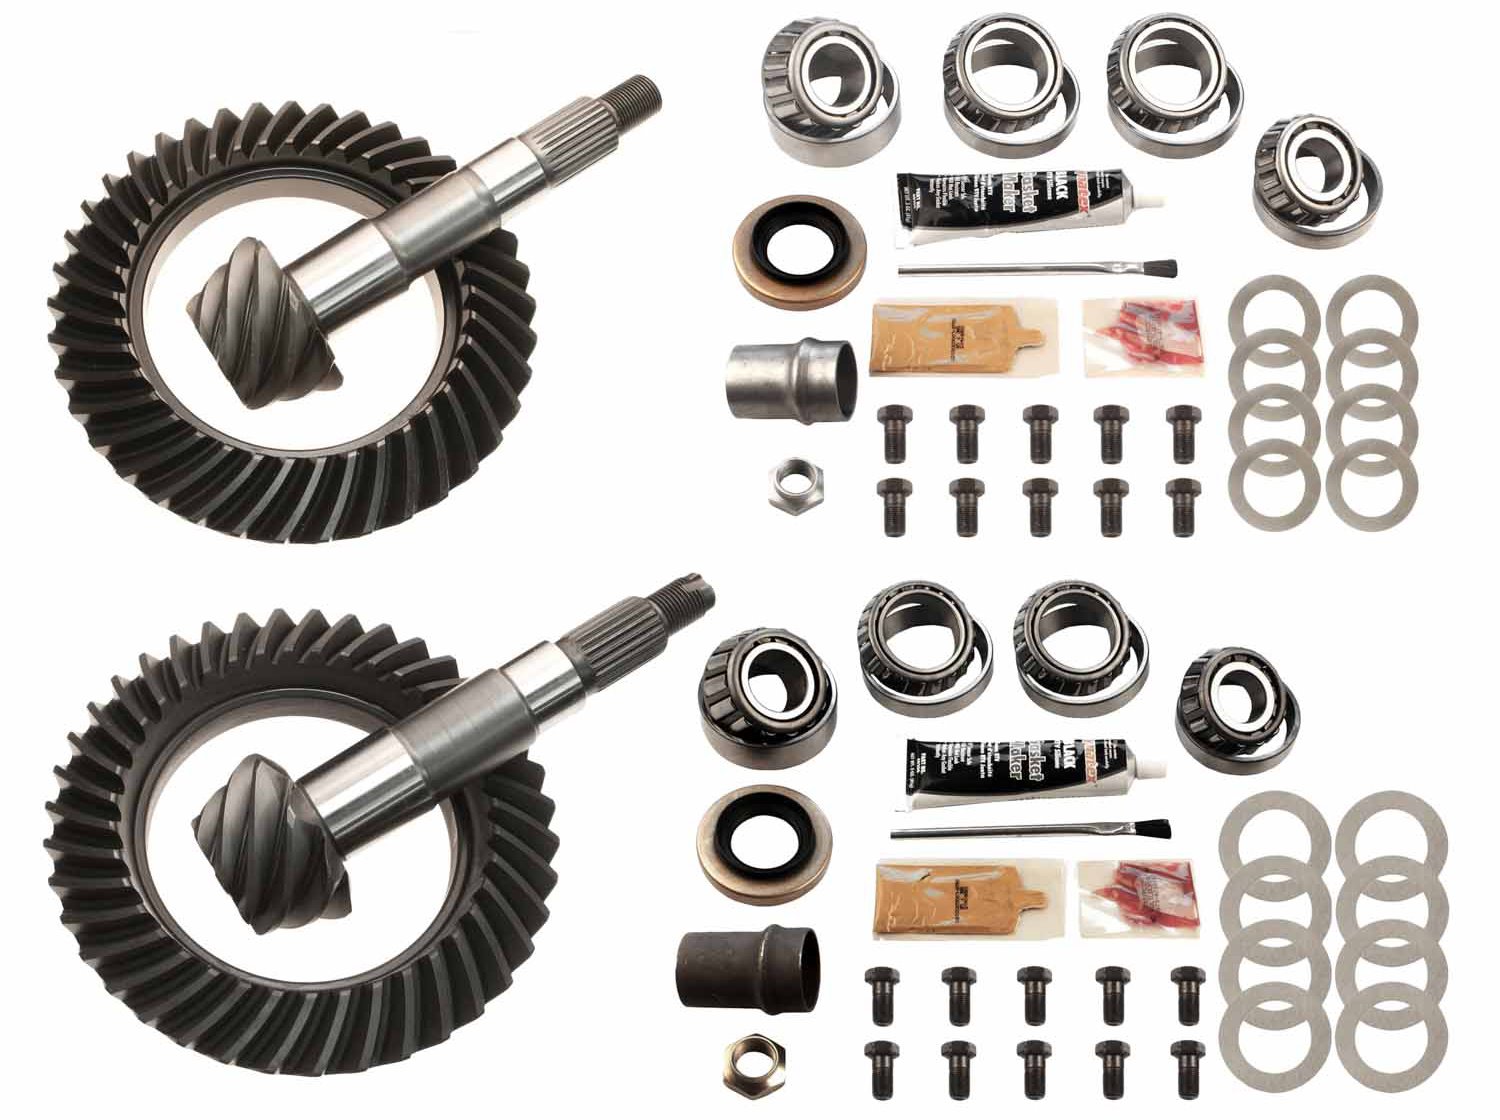 Complete Front and Rear Ring and Pinion Kit 1986-1988 Toyota Pickup, 4Runner 4-Cylinder - 4.88 Ratio